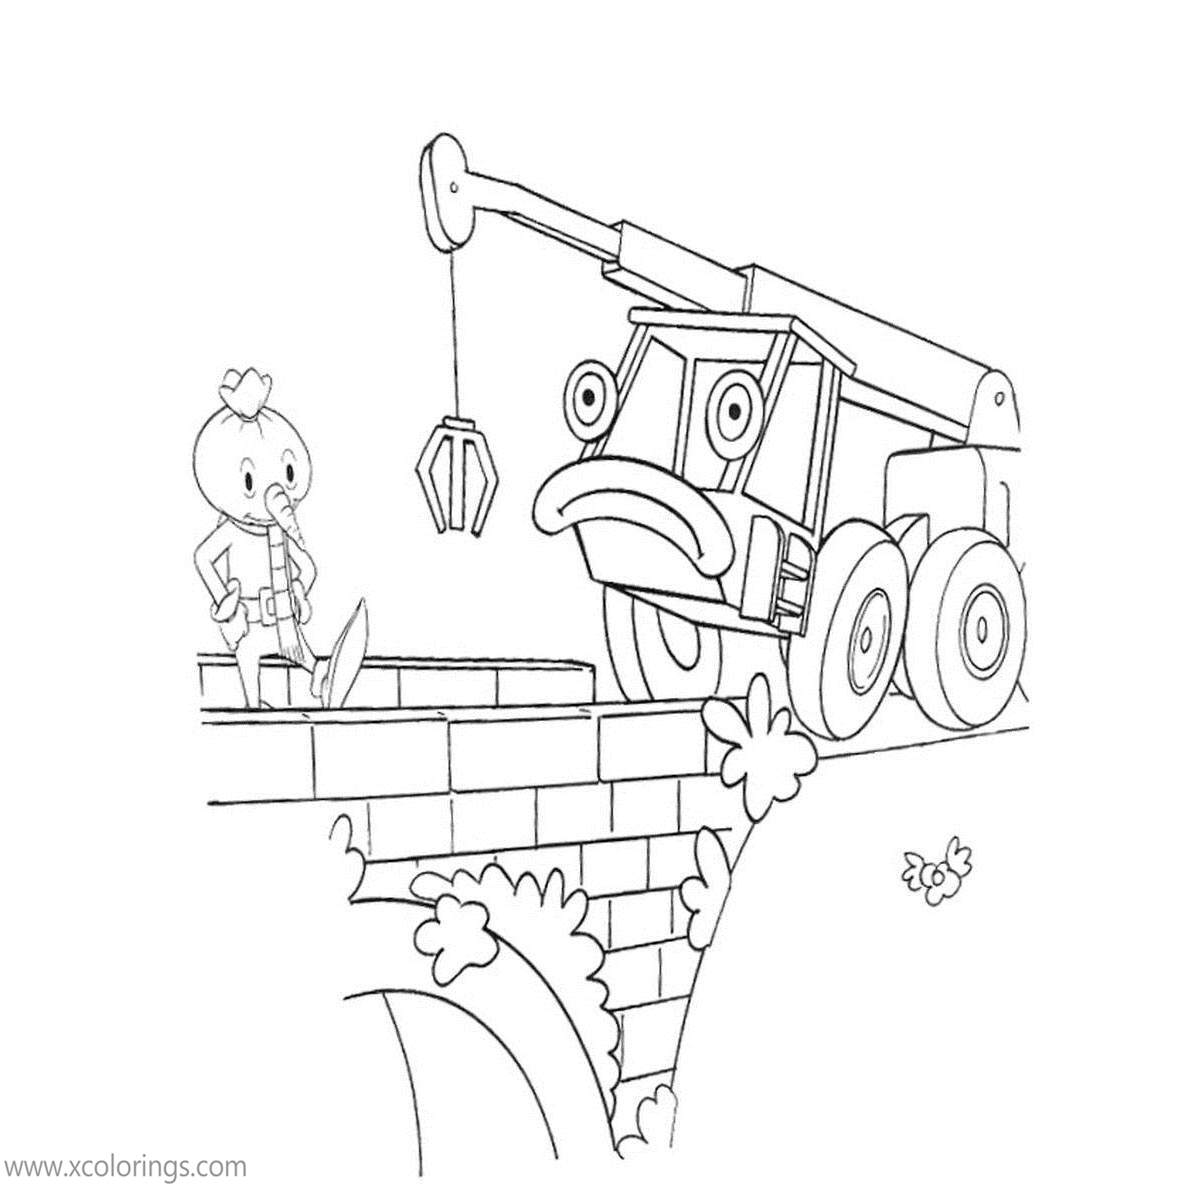 Free Bob The Builder Coloring Pages Characters Lofty and Spud printable